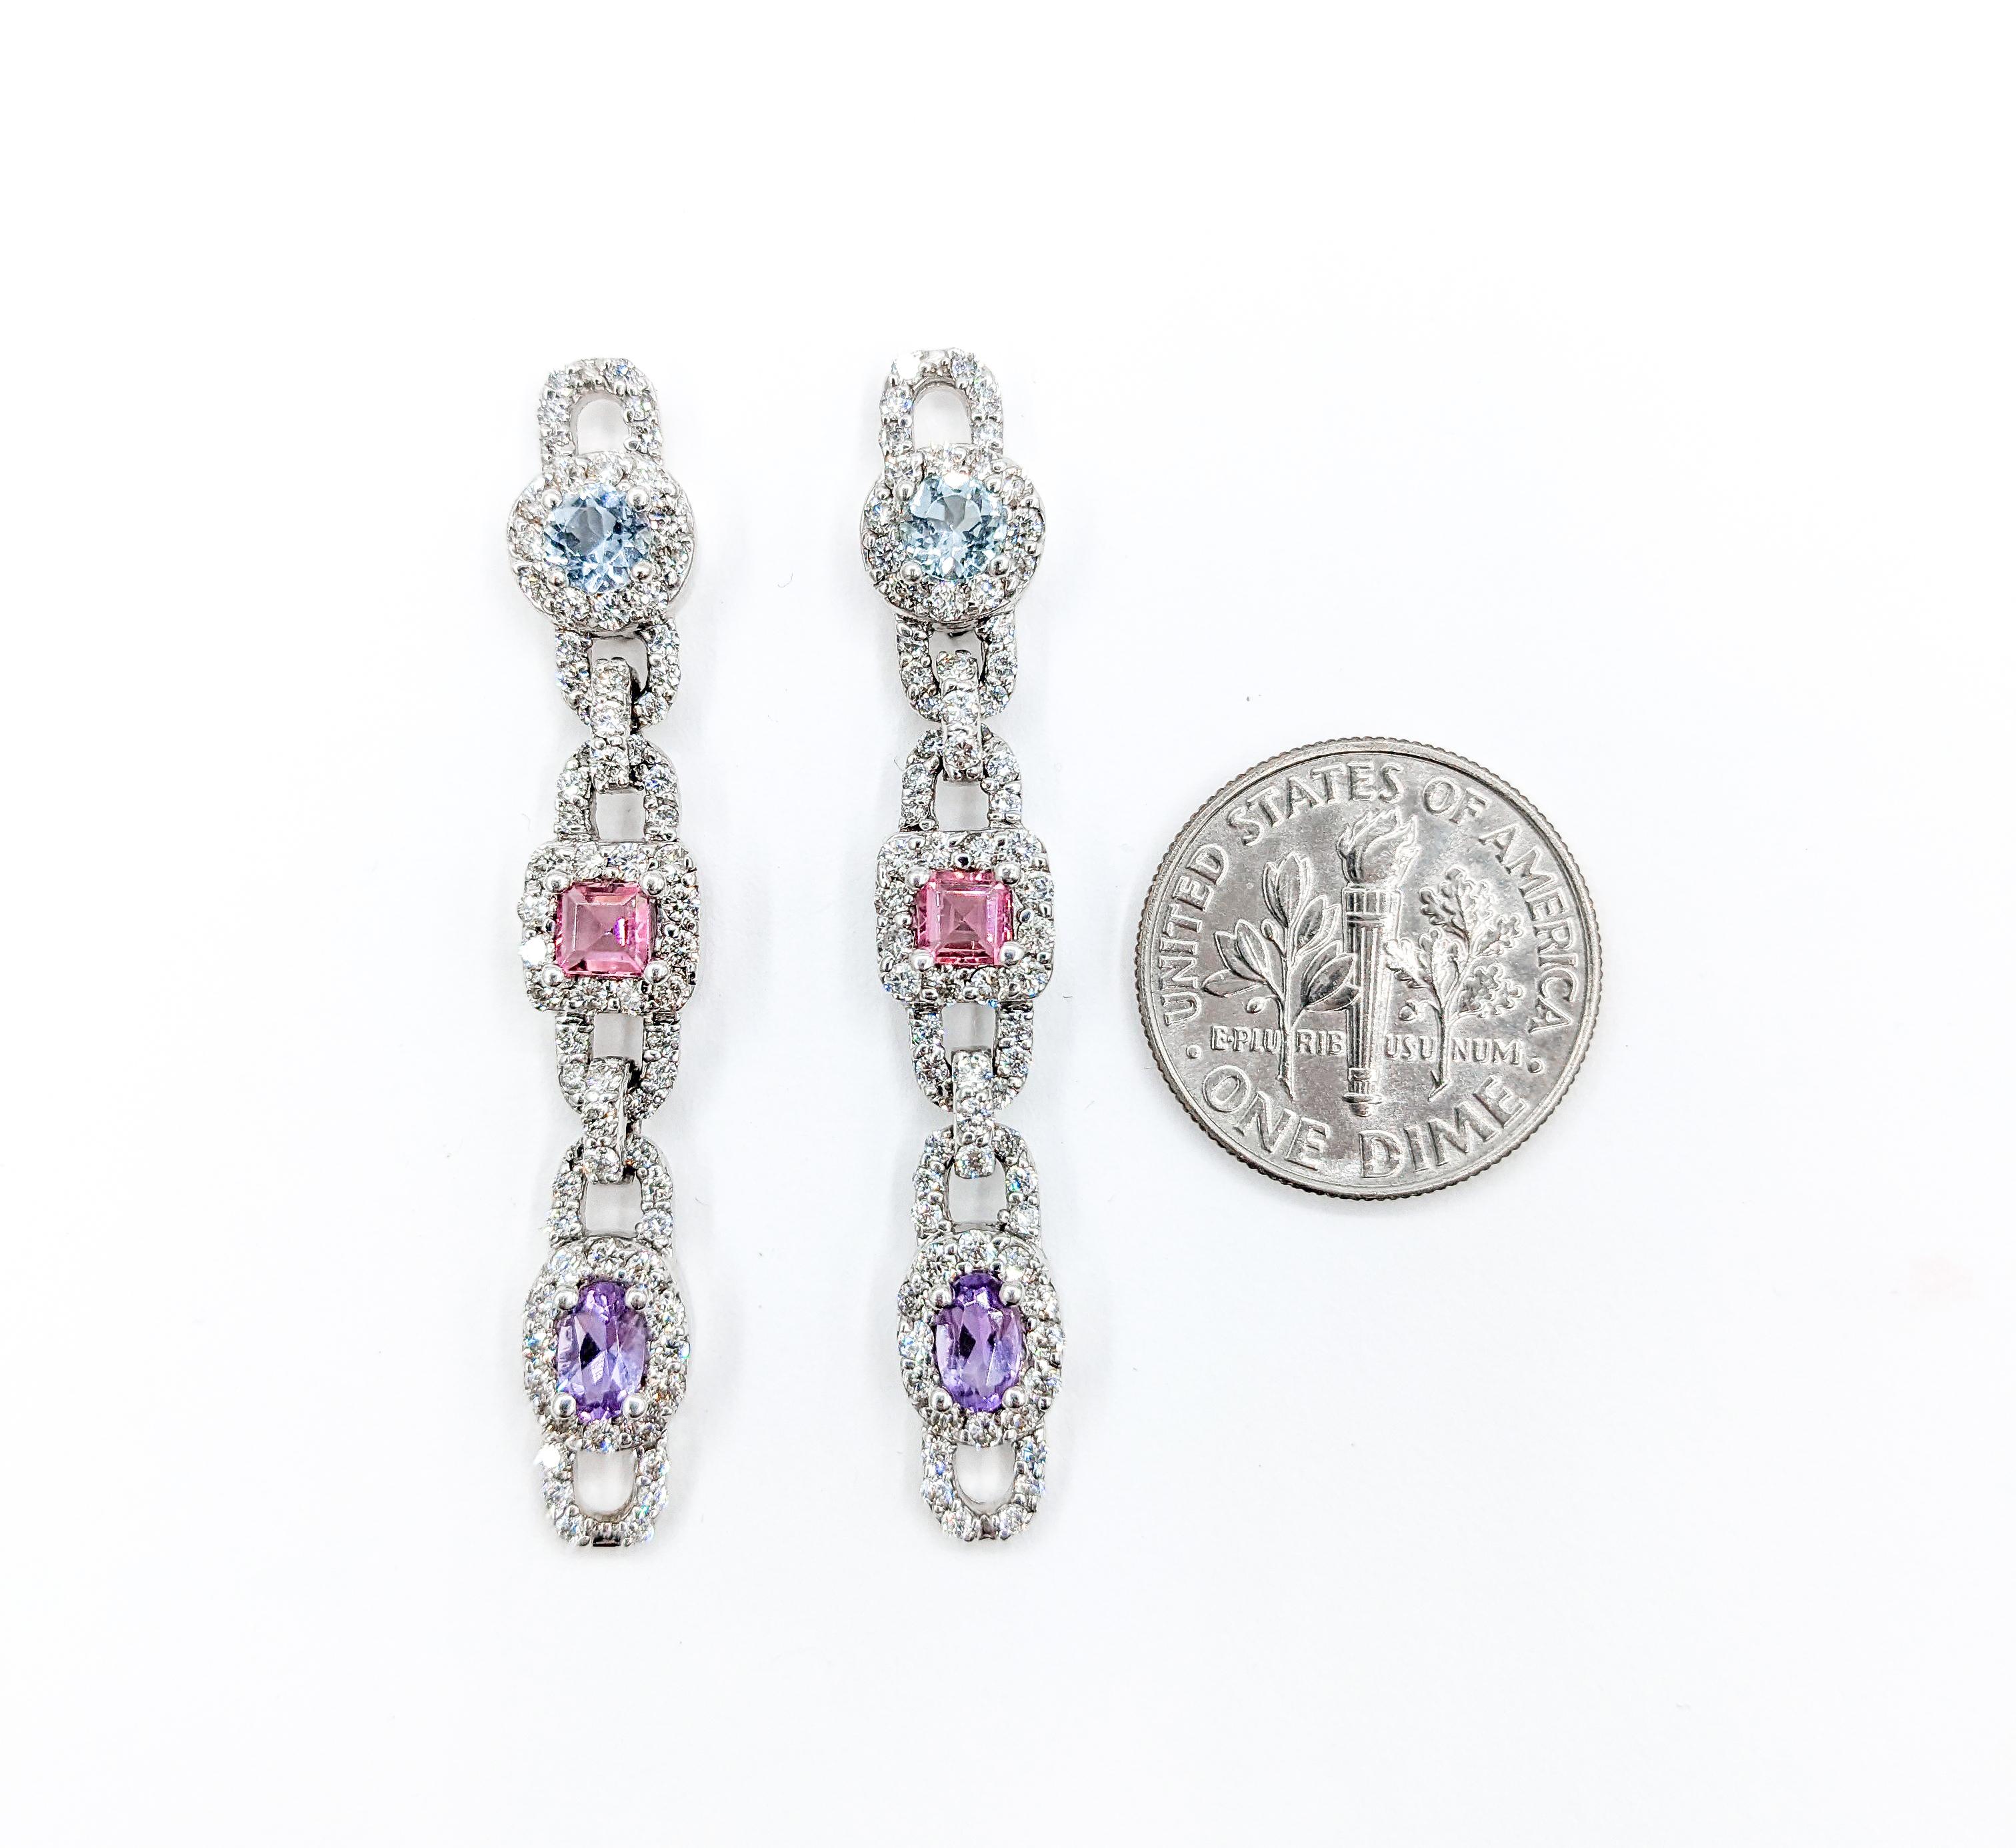 Multi-Gemstone Aquamarine, Pink Tourmaline, Amethyst & Diamond Drop Earrings in White Gold

These beautiful Multi Stone earrings feature Pastel Hues of Aquamarine, Pink Tourmaline & Amethyst Gemstones in 14K White Gold. The design is enhanced with